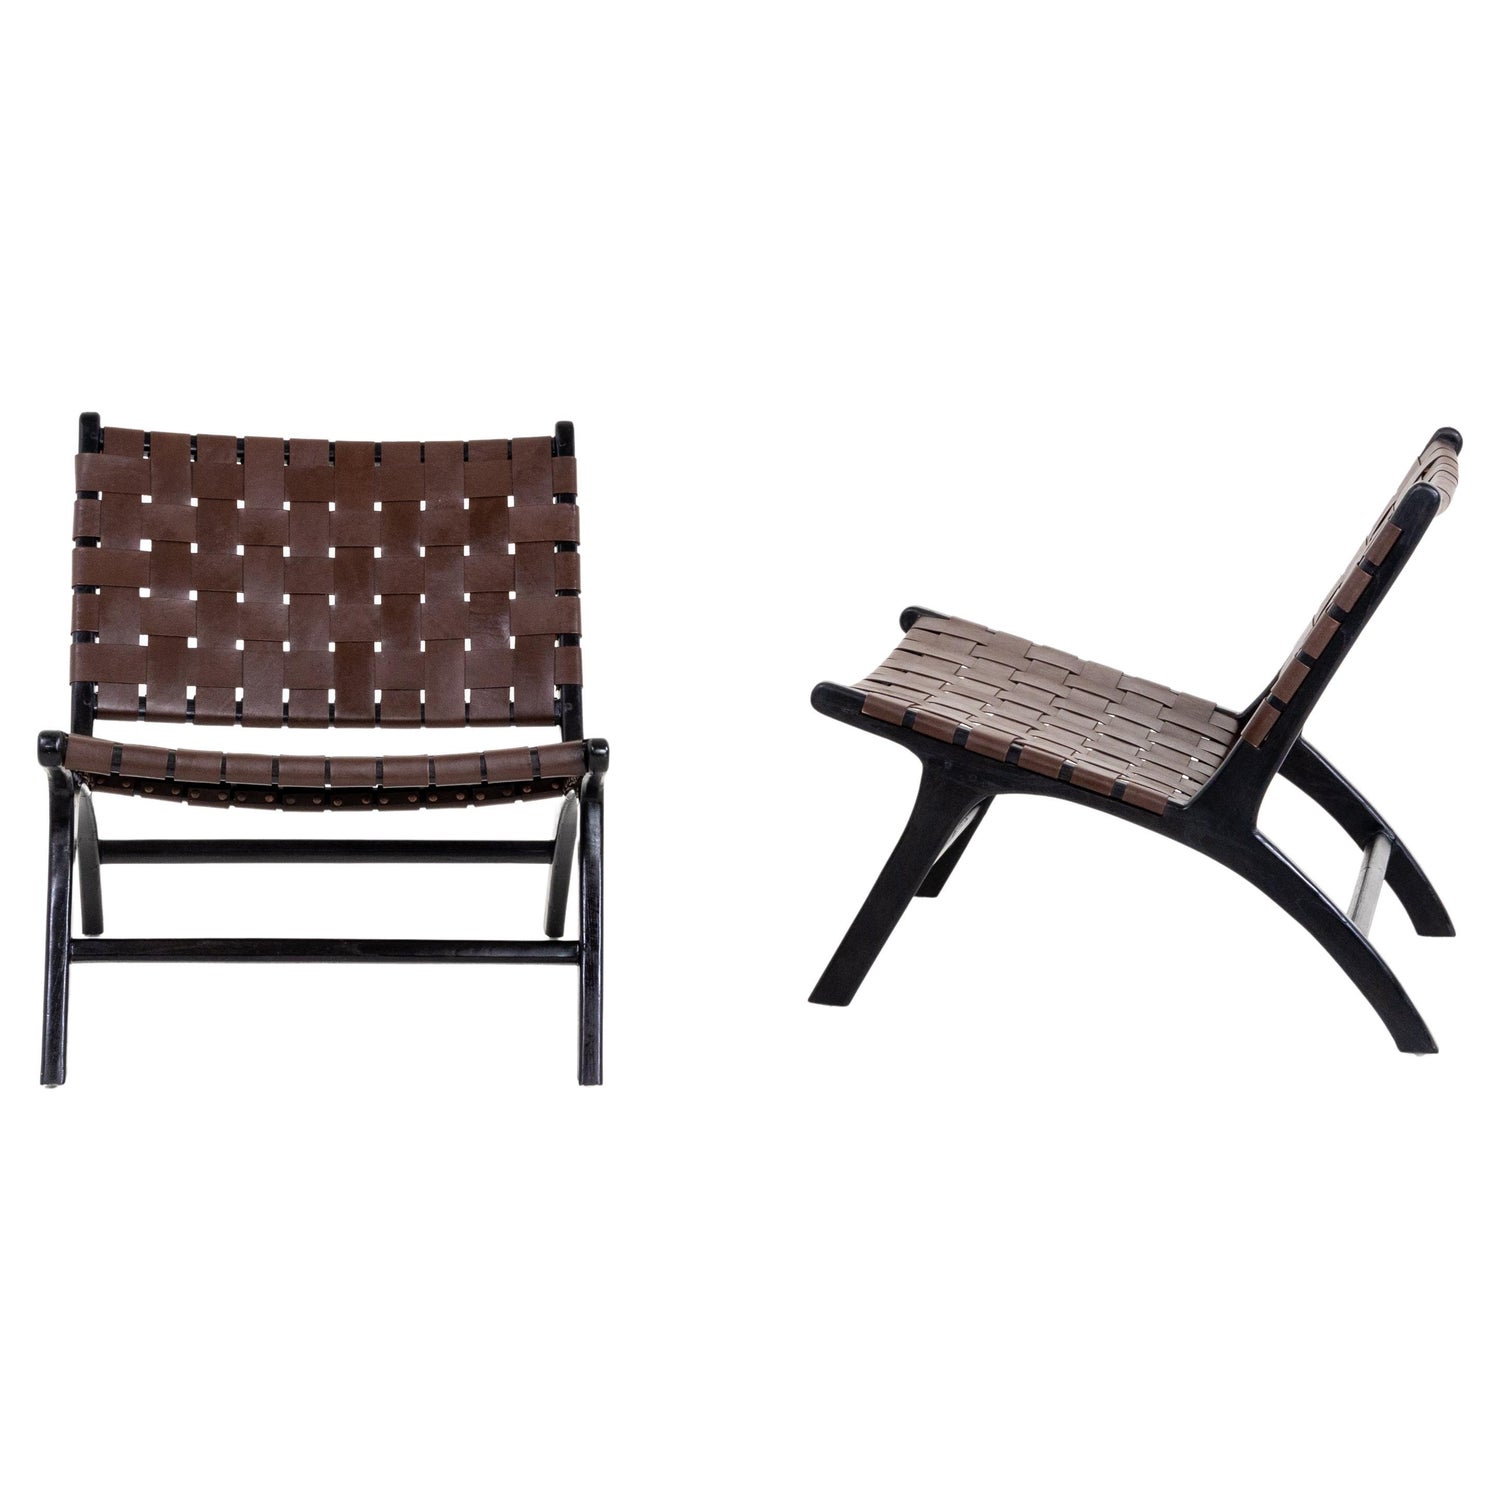 Olivier de Schrijver, Lounge Chairs, 20th Century For Sale at 1stDibs